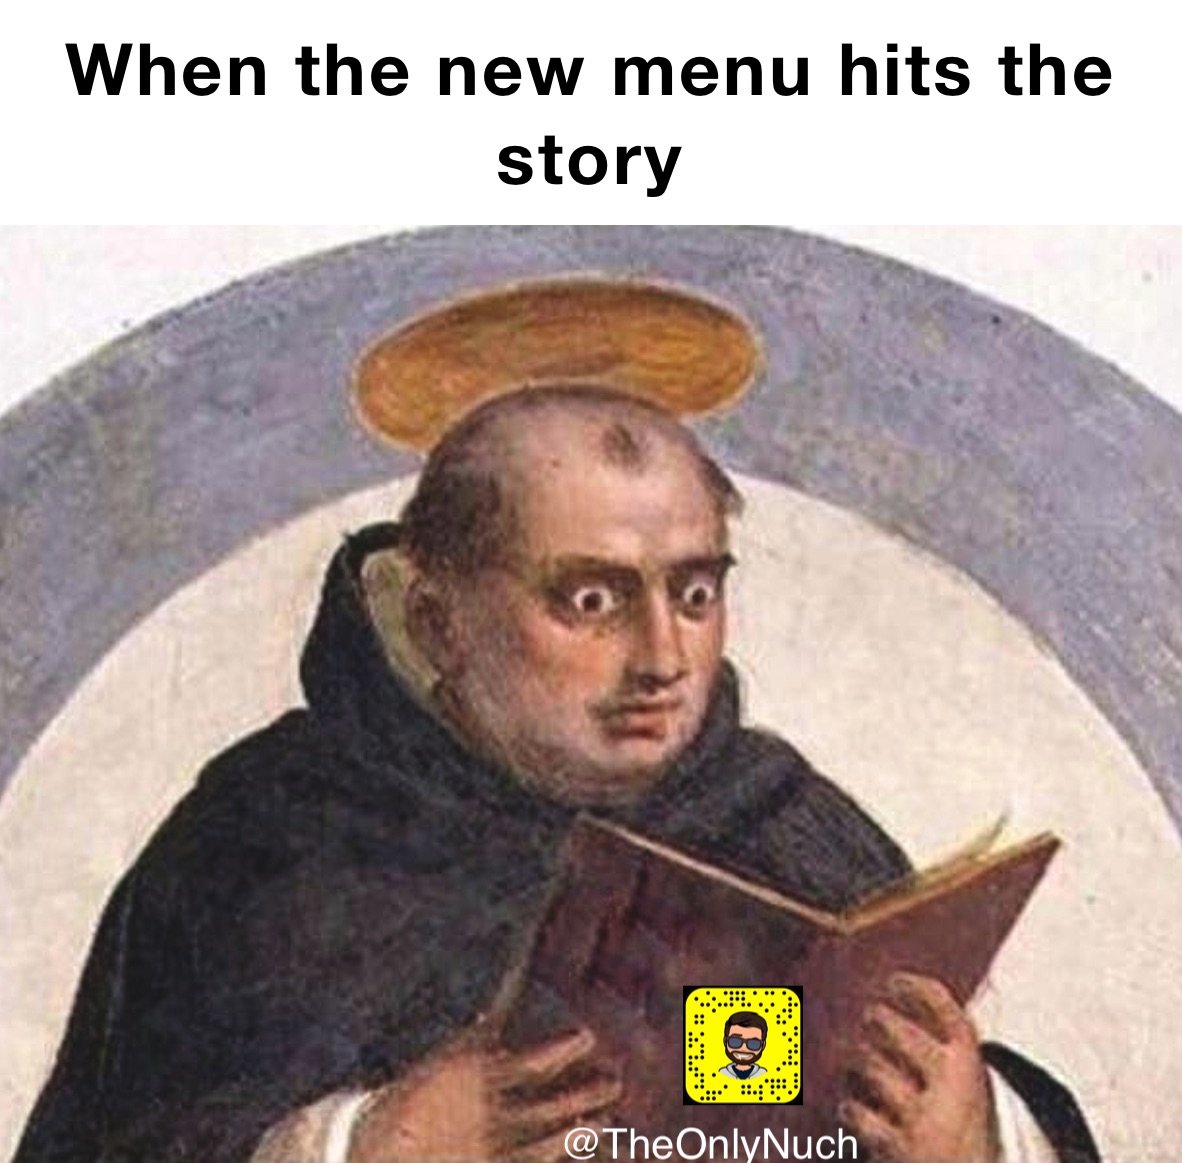 When the new menu hits the story